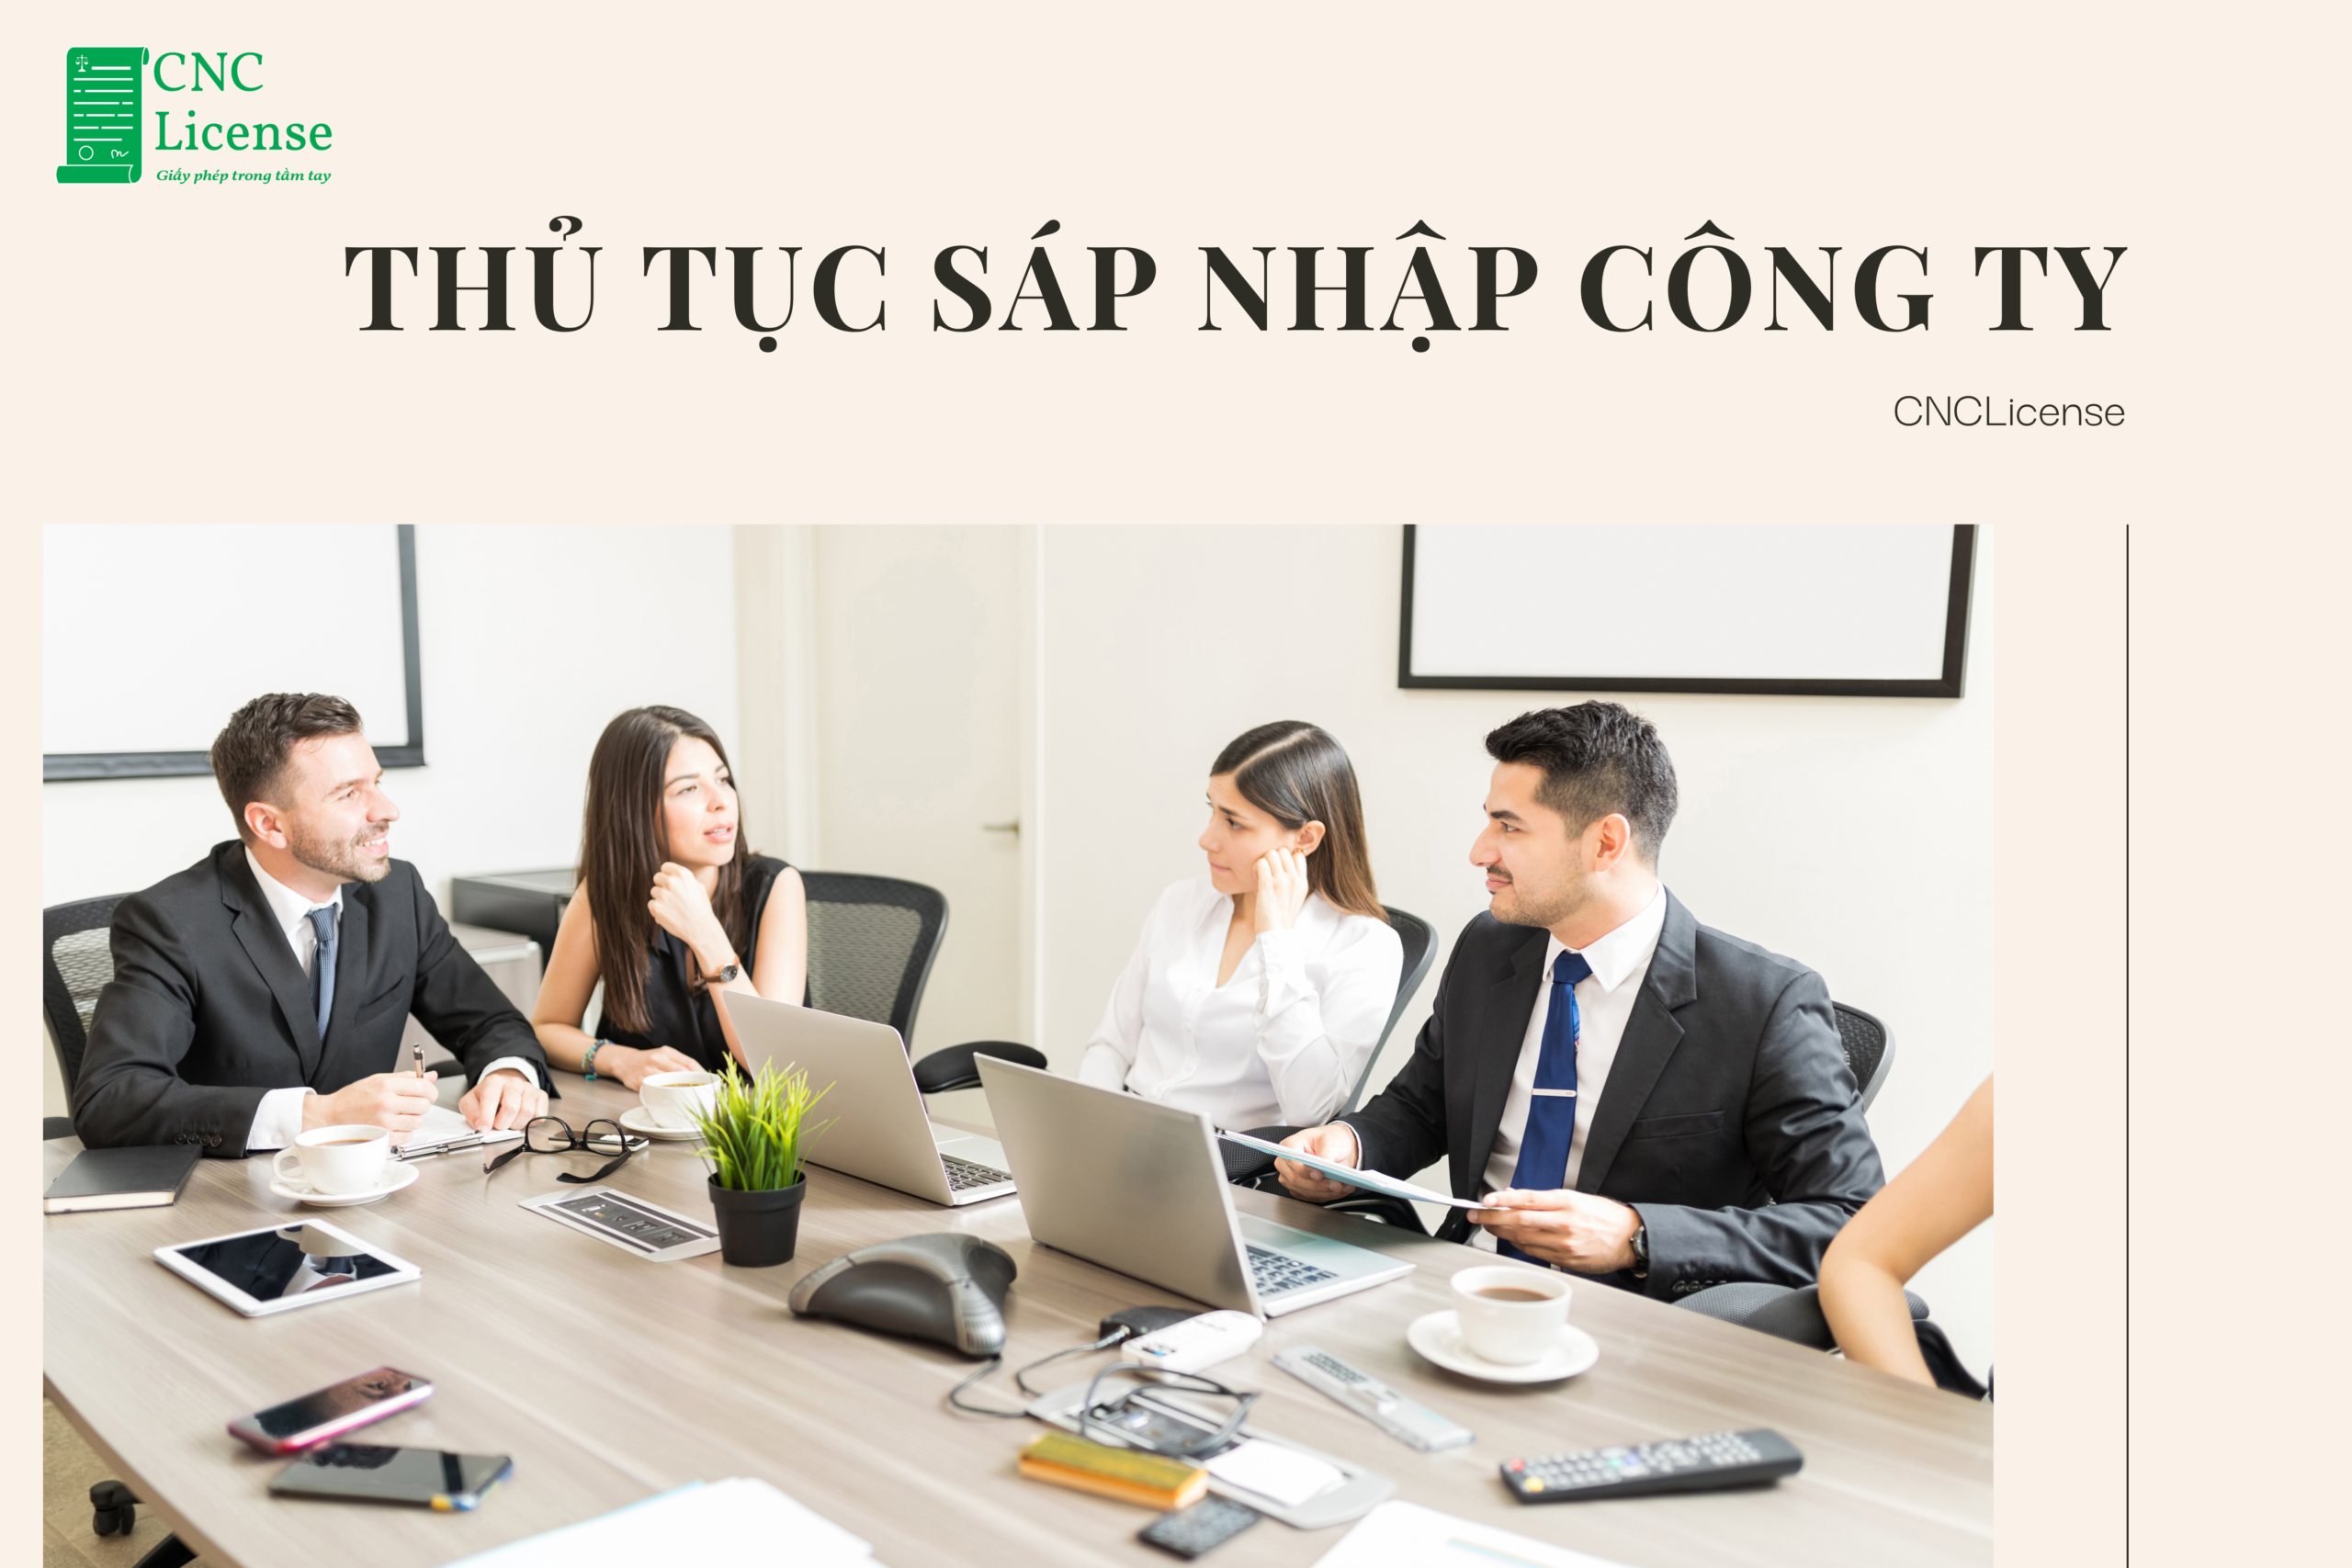 https://cnclicense.com/wp-content/uploads/2023/02/5.Quy-trinh-thu-tuc-sap-nhap-cong-ty.png